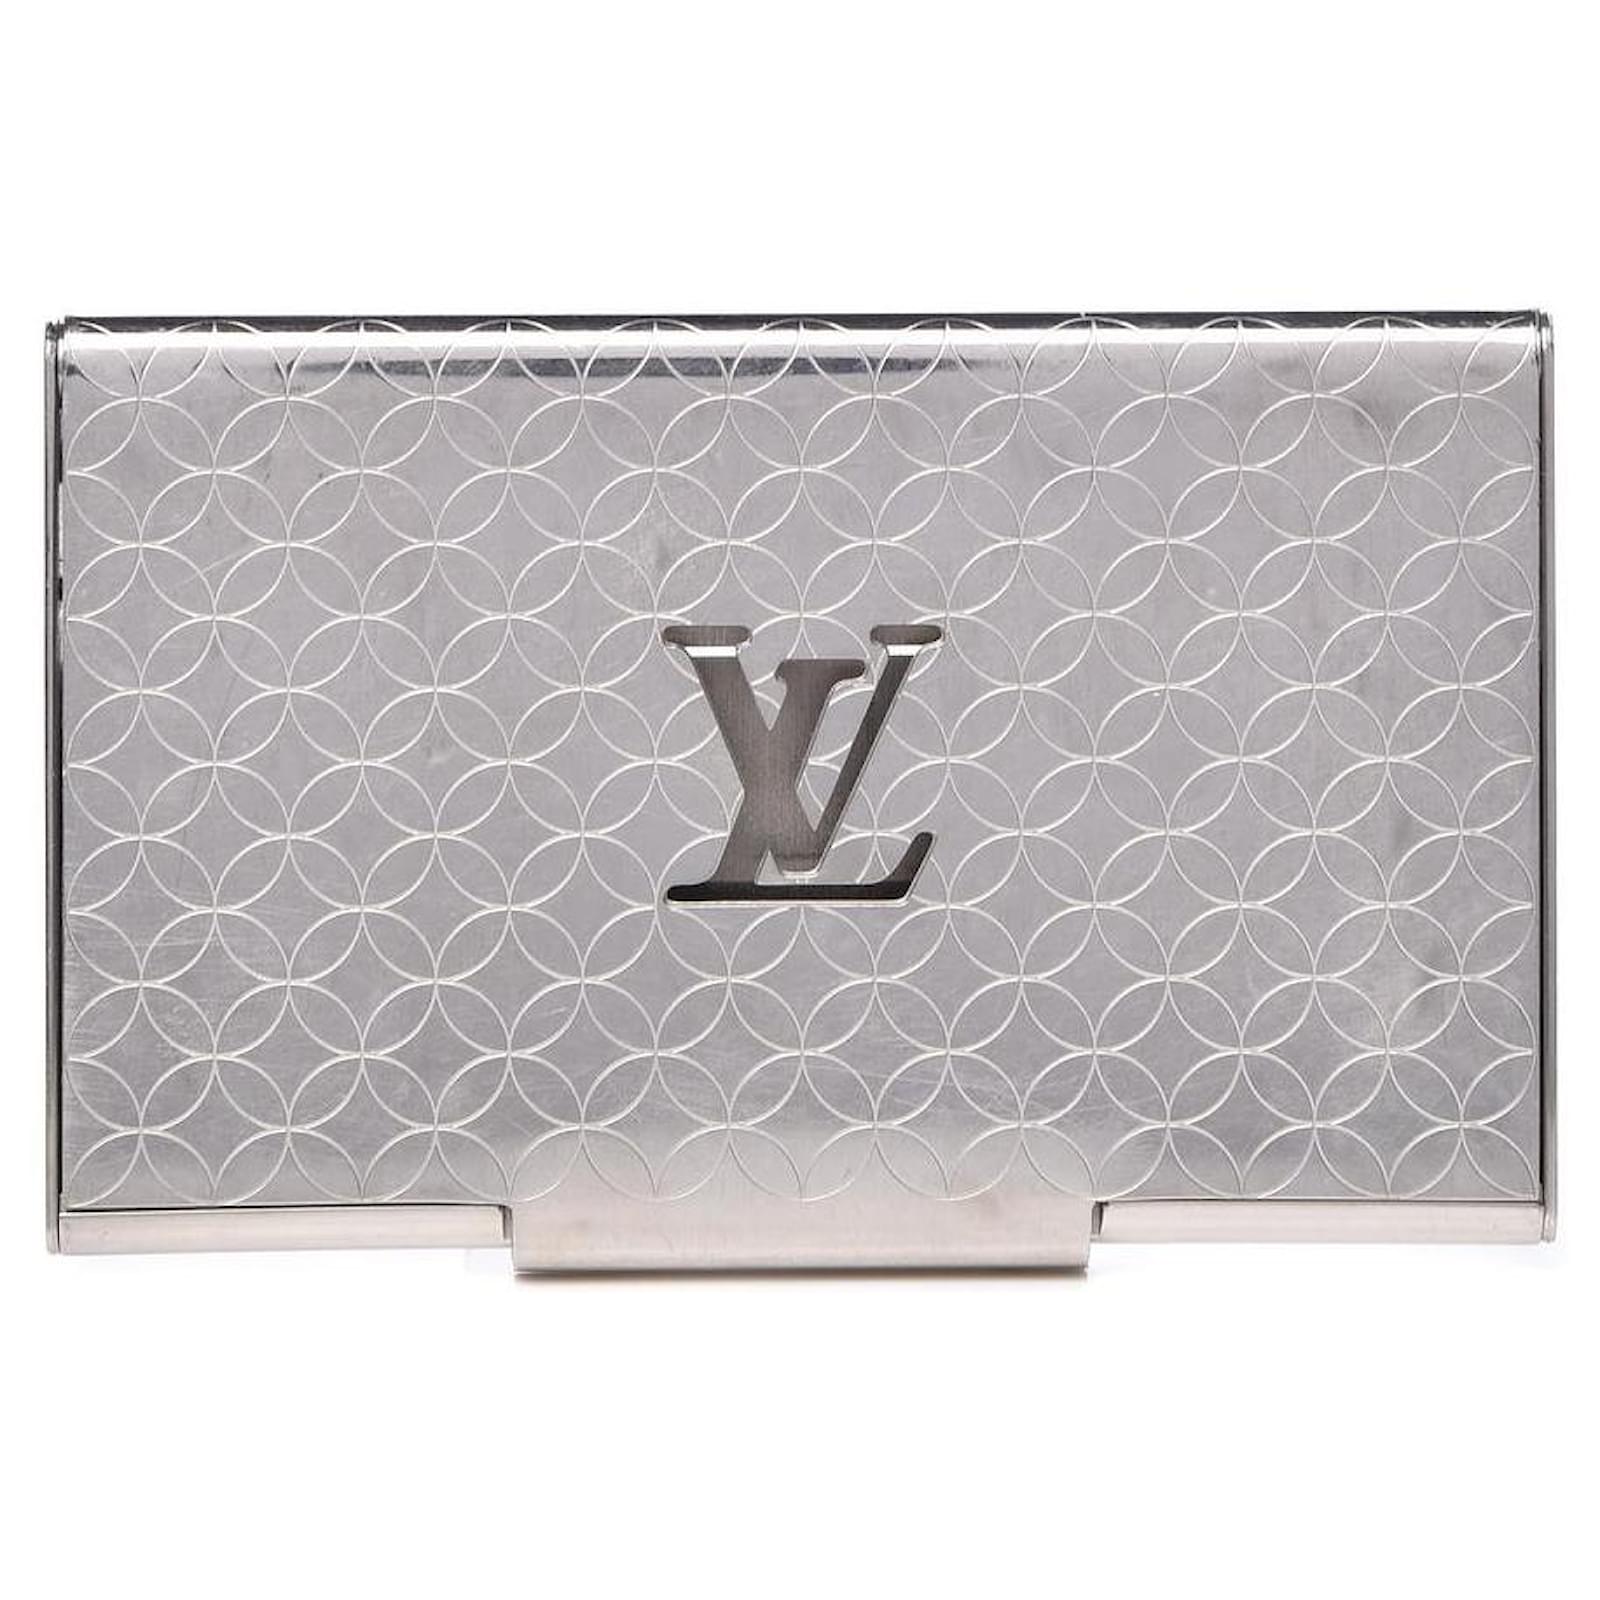 Unboxing and Review Of New Louis Vuitton ID Card Holder Black Damier   YouTube